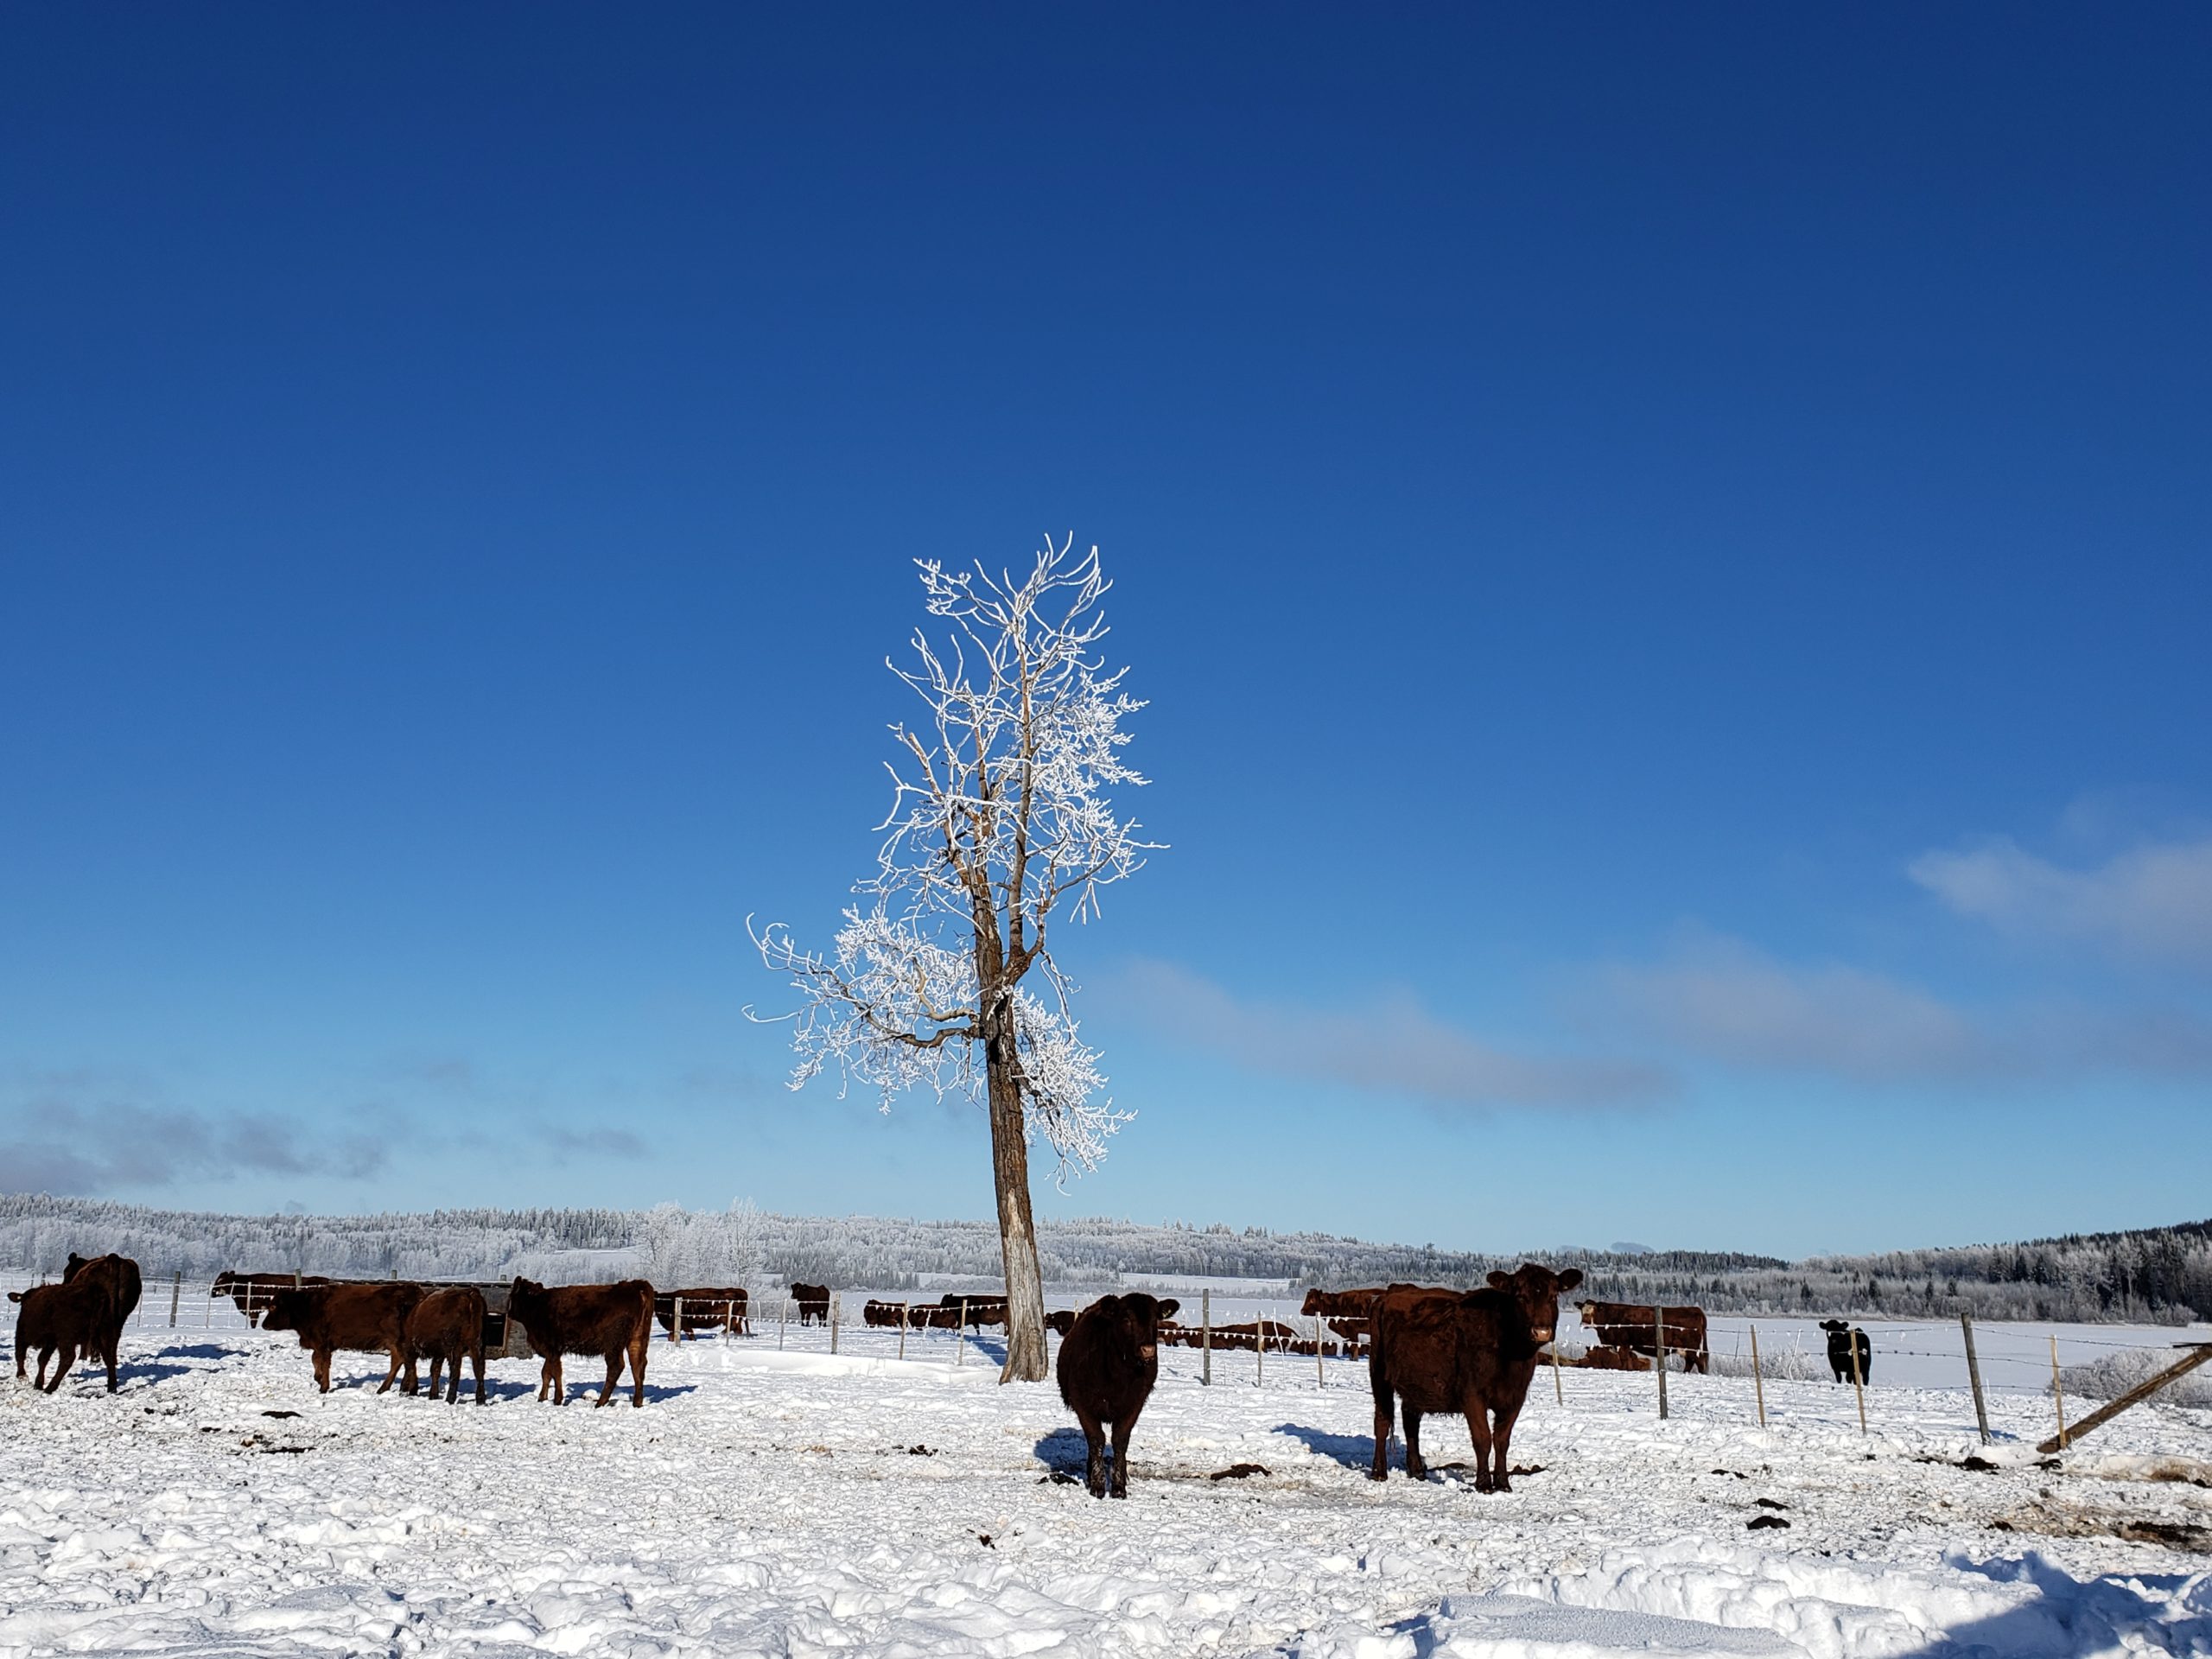 photo of yearling cows in a snowy field